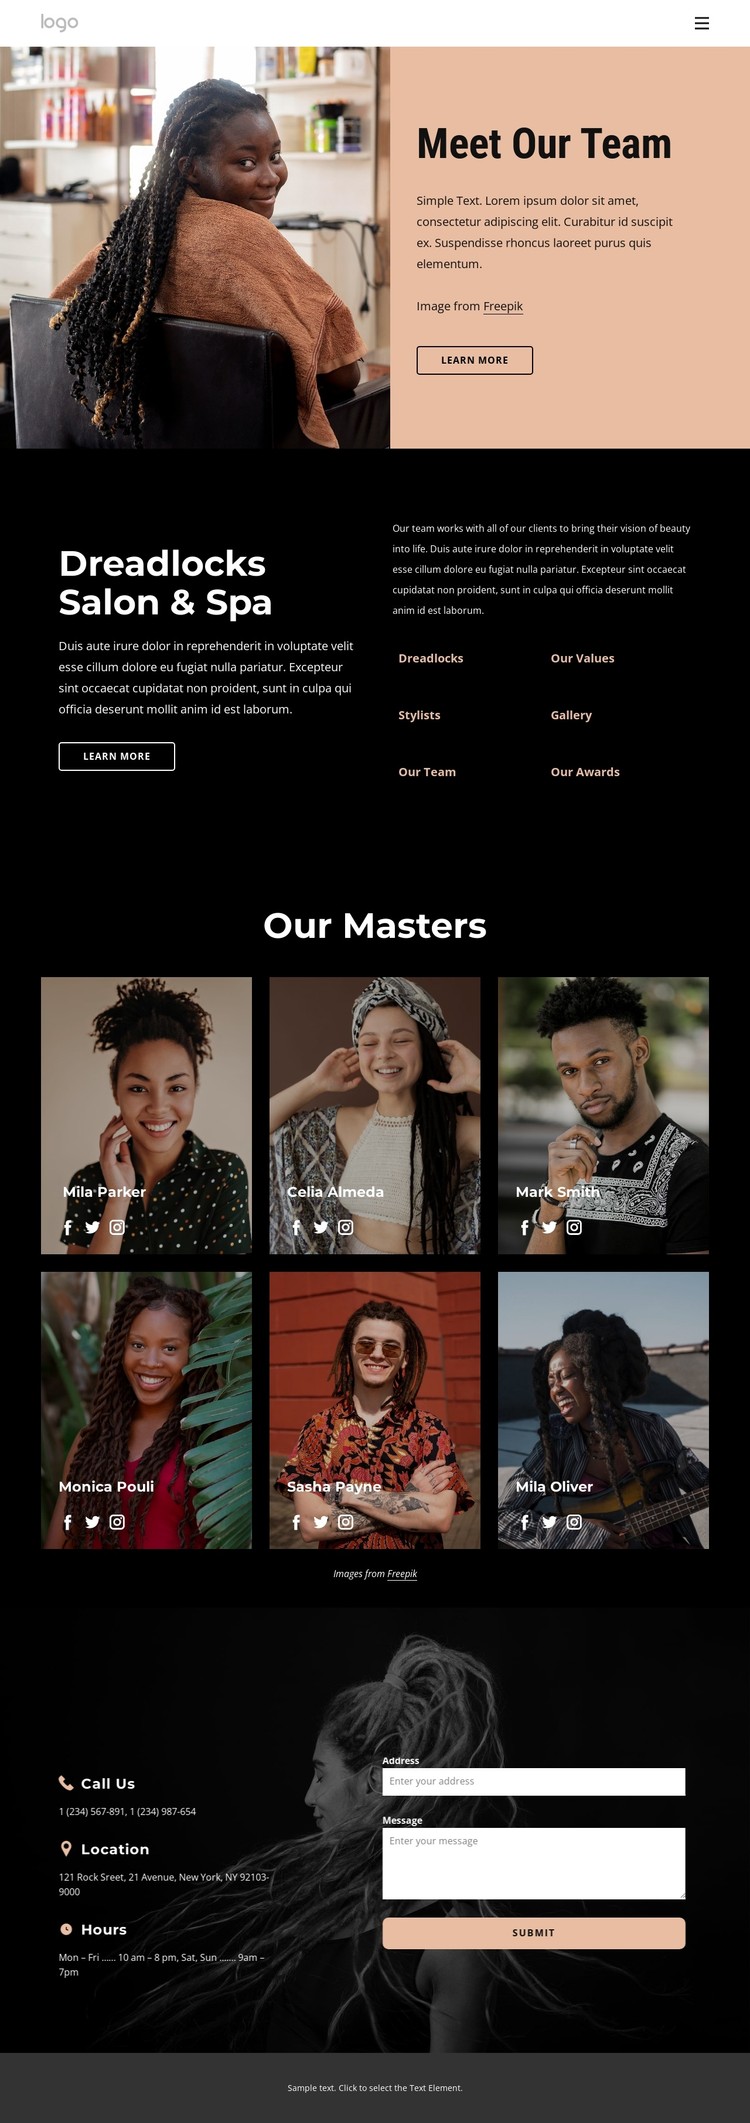 Meet our masters CSS Template